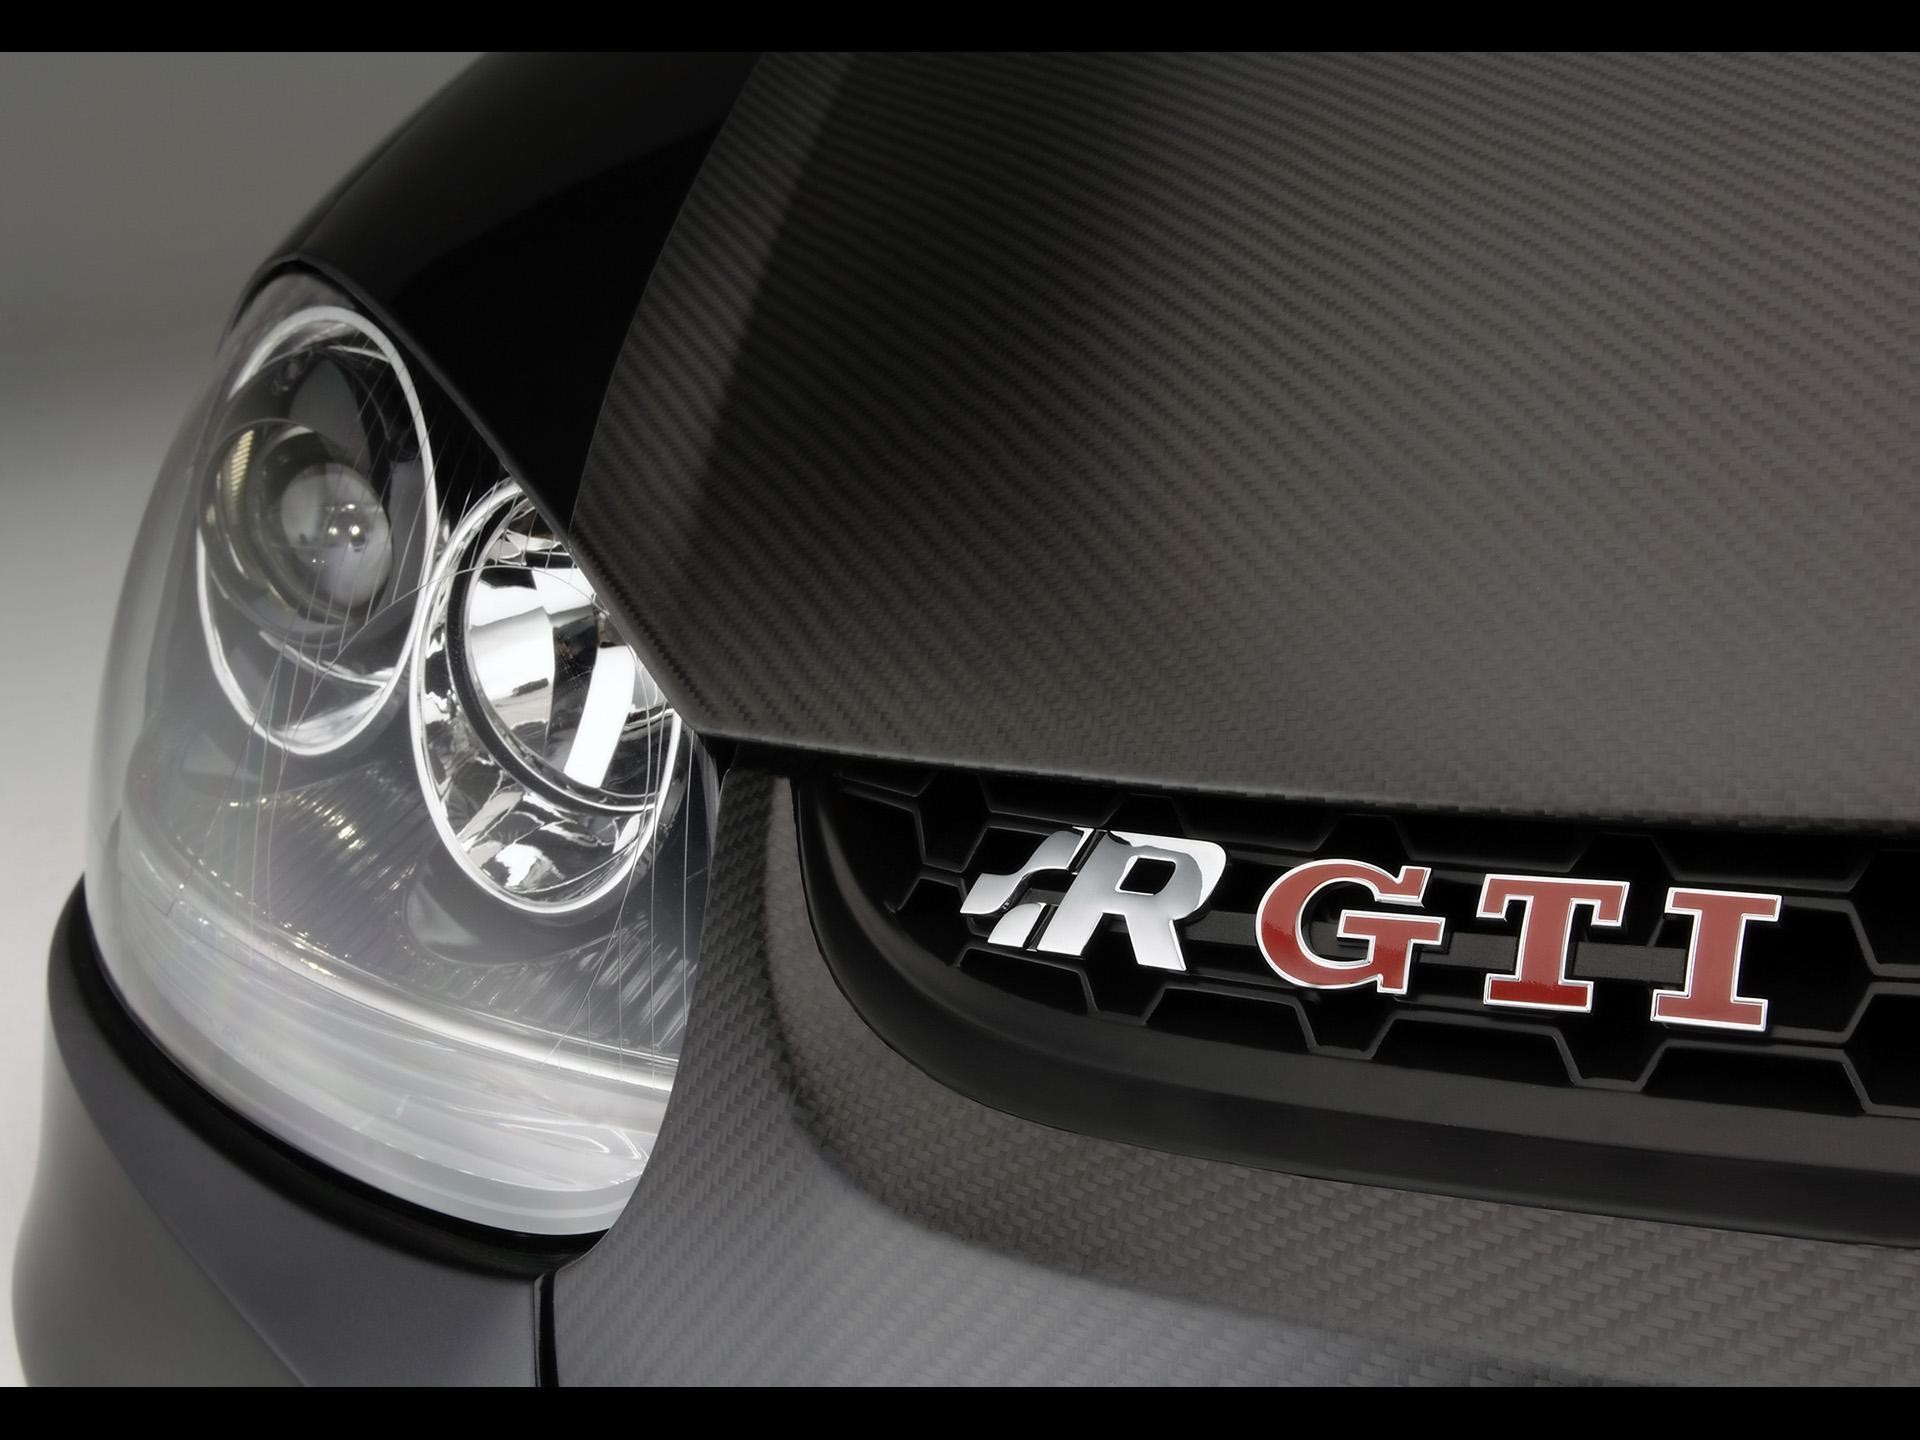 1920x1440 Awesome Volkswagen Golf R GTI wallpaper | Golf wallpapers